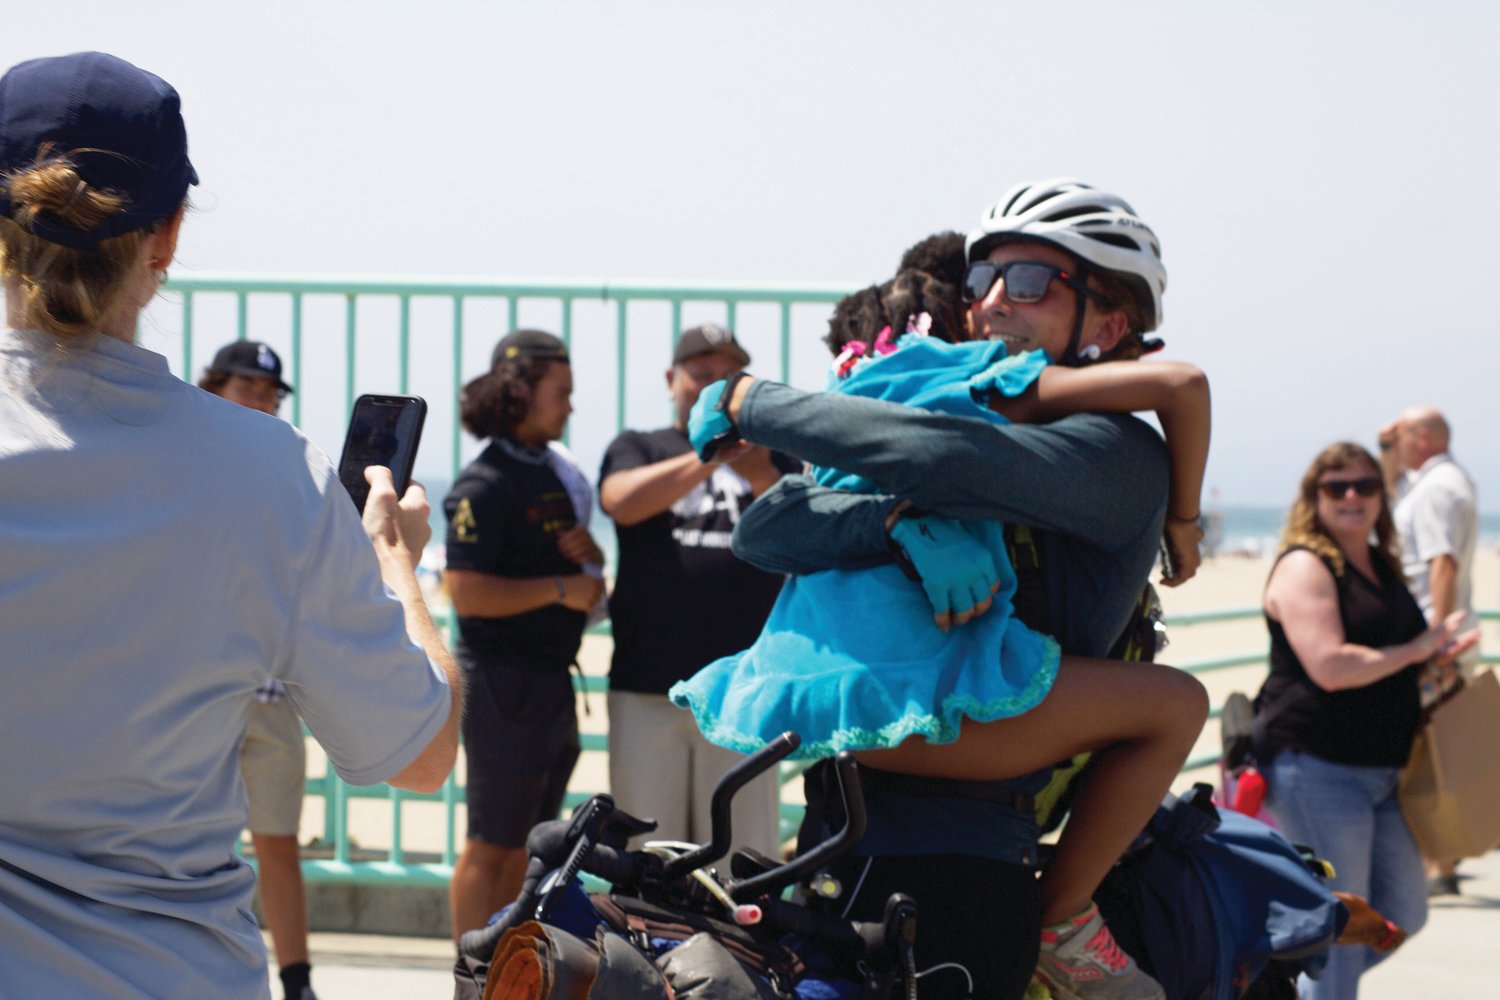 Pittsboro's Emmaus Holder (in white helmet) hugs his younger sister, Mia (in blue), after reaching the finish line of his cross-country cycling trip at a pier in Los Angeles. Holder's family traveled all the way to the West Coast to see him finish the journey on July 12.